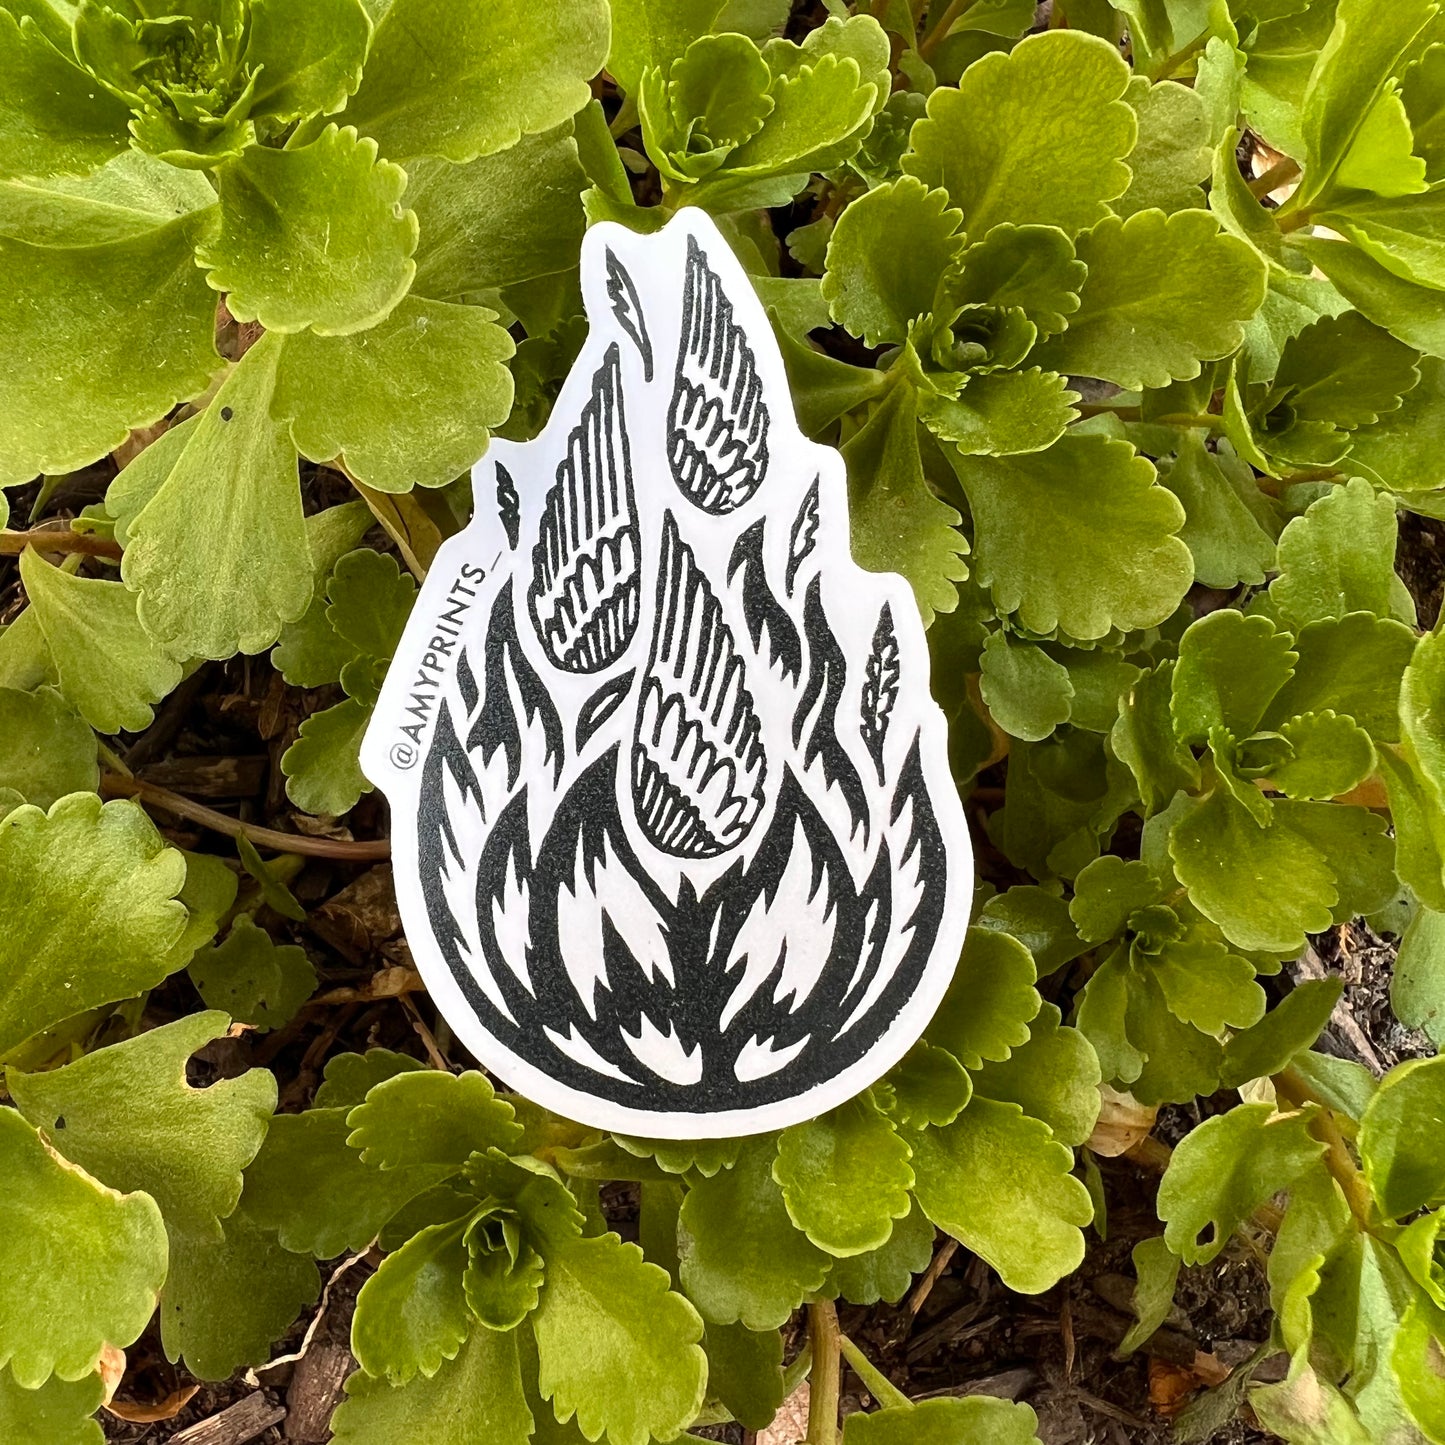 “From the Ashes” 3 Inch Sticker | Linocut Block Print Eco-Friendly Sticker